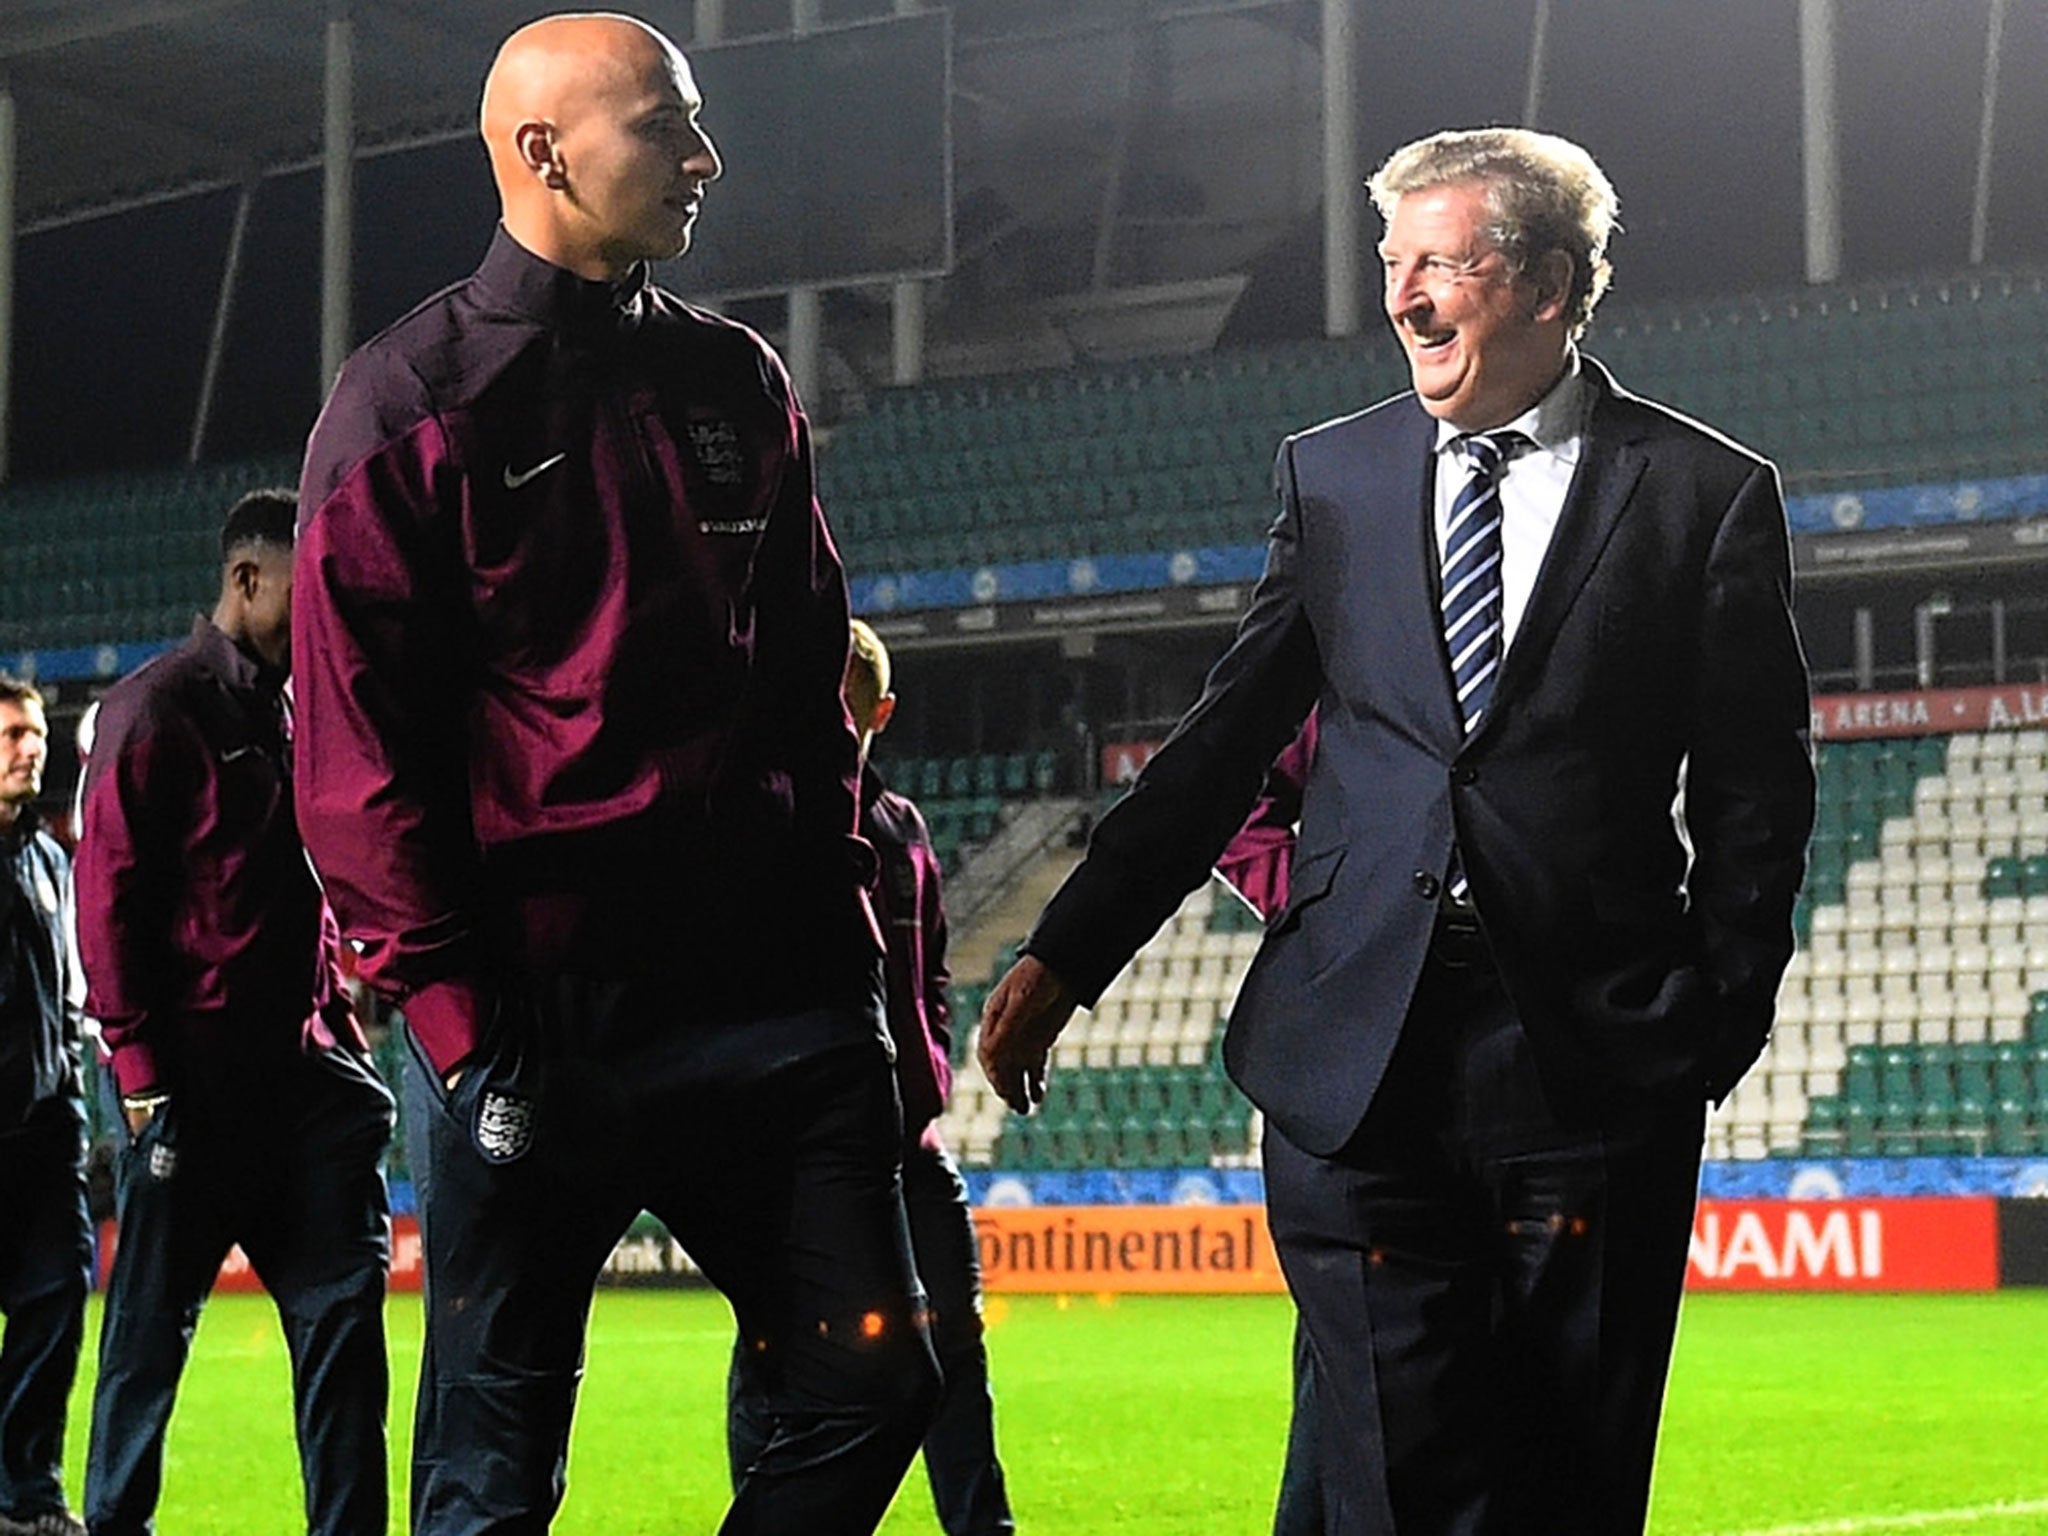 England manager Roy Hodgson has named Jonjo Shelvey (left) in his England squad